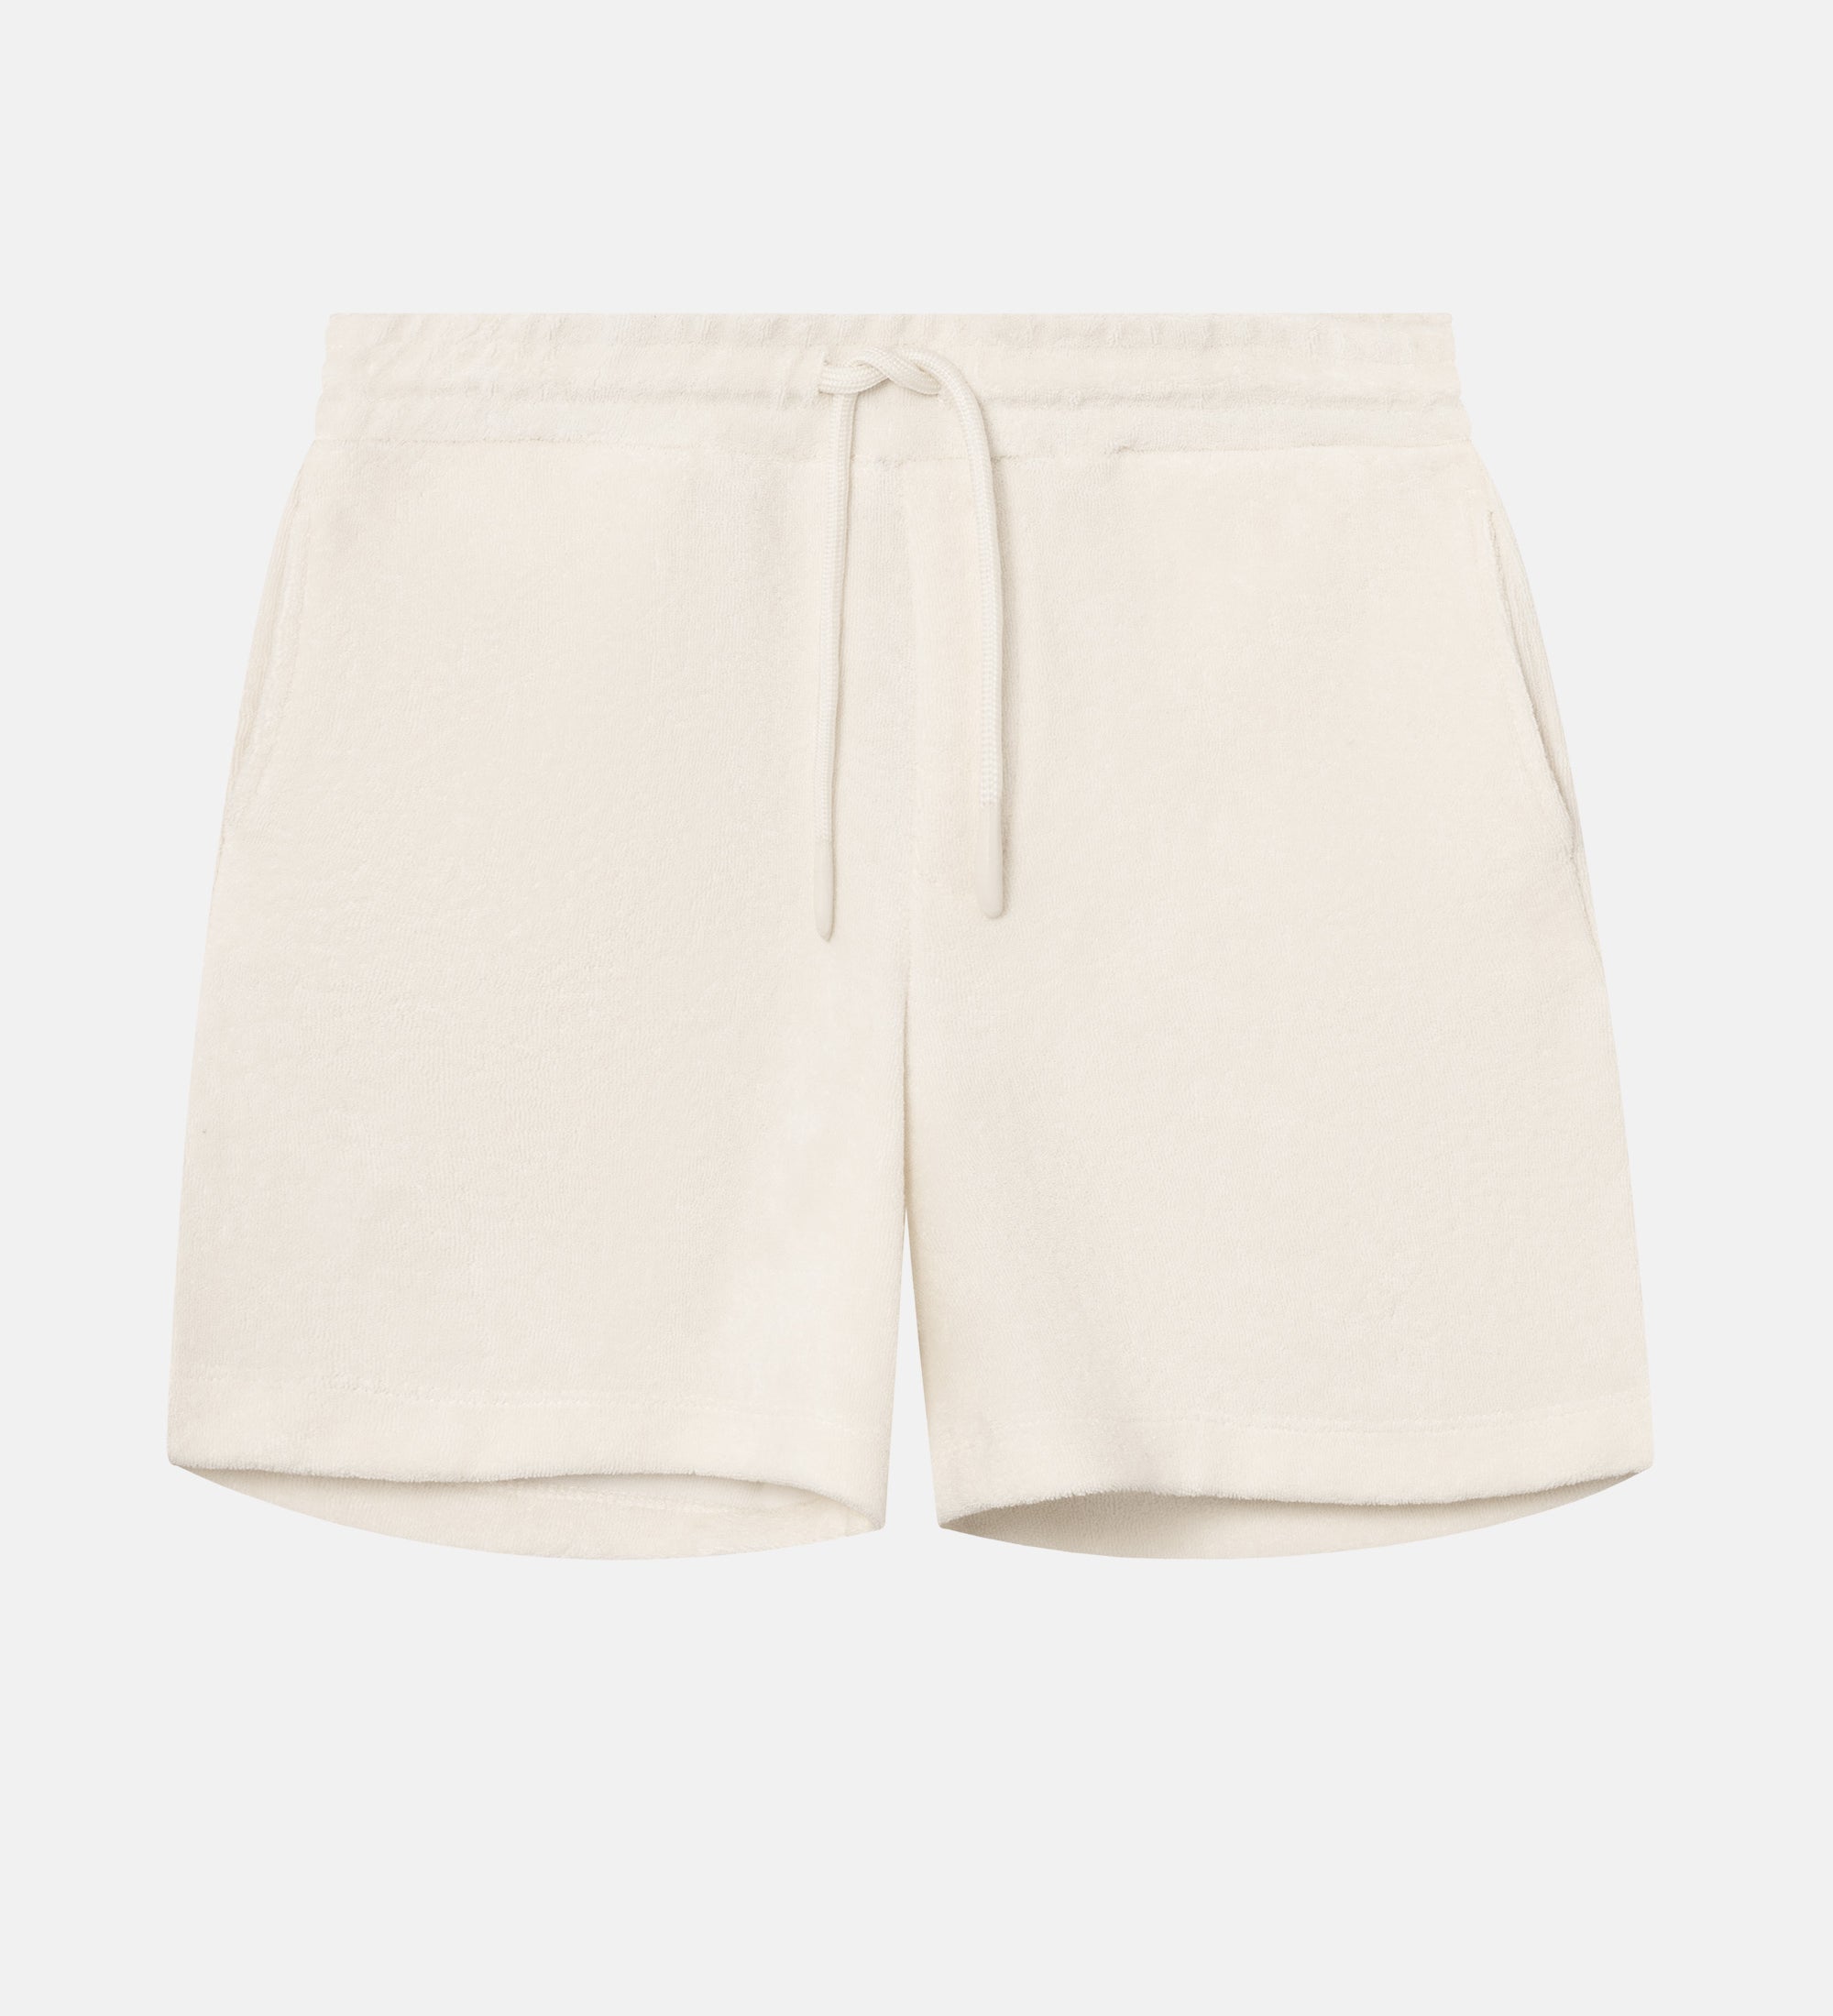 White mid length shorts in terry toweling fabric with drawdtring and two side pockets.